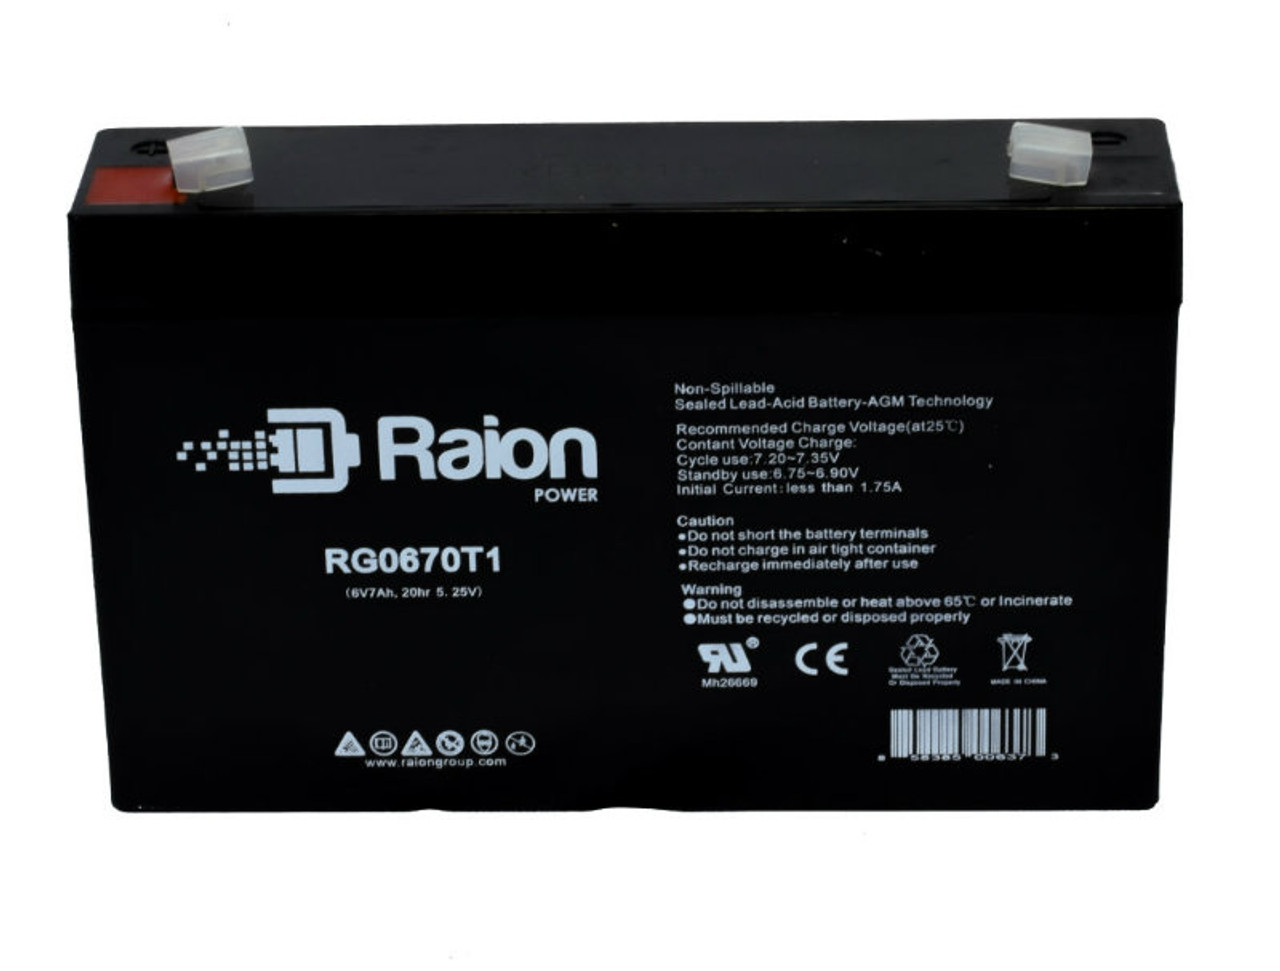 Raion Power RG0670T1 Replacement Battery Cartridge for Costzon 6V Ride on Car, Kids Battery Powered Electric Vehicle